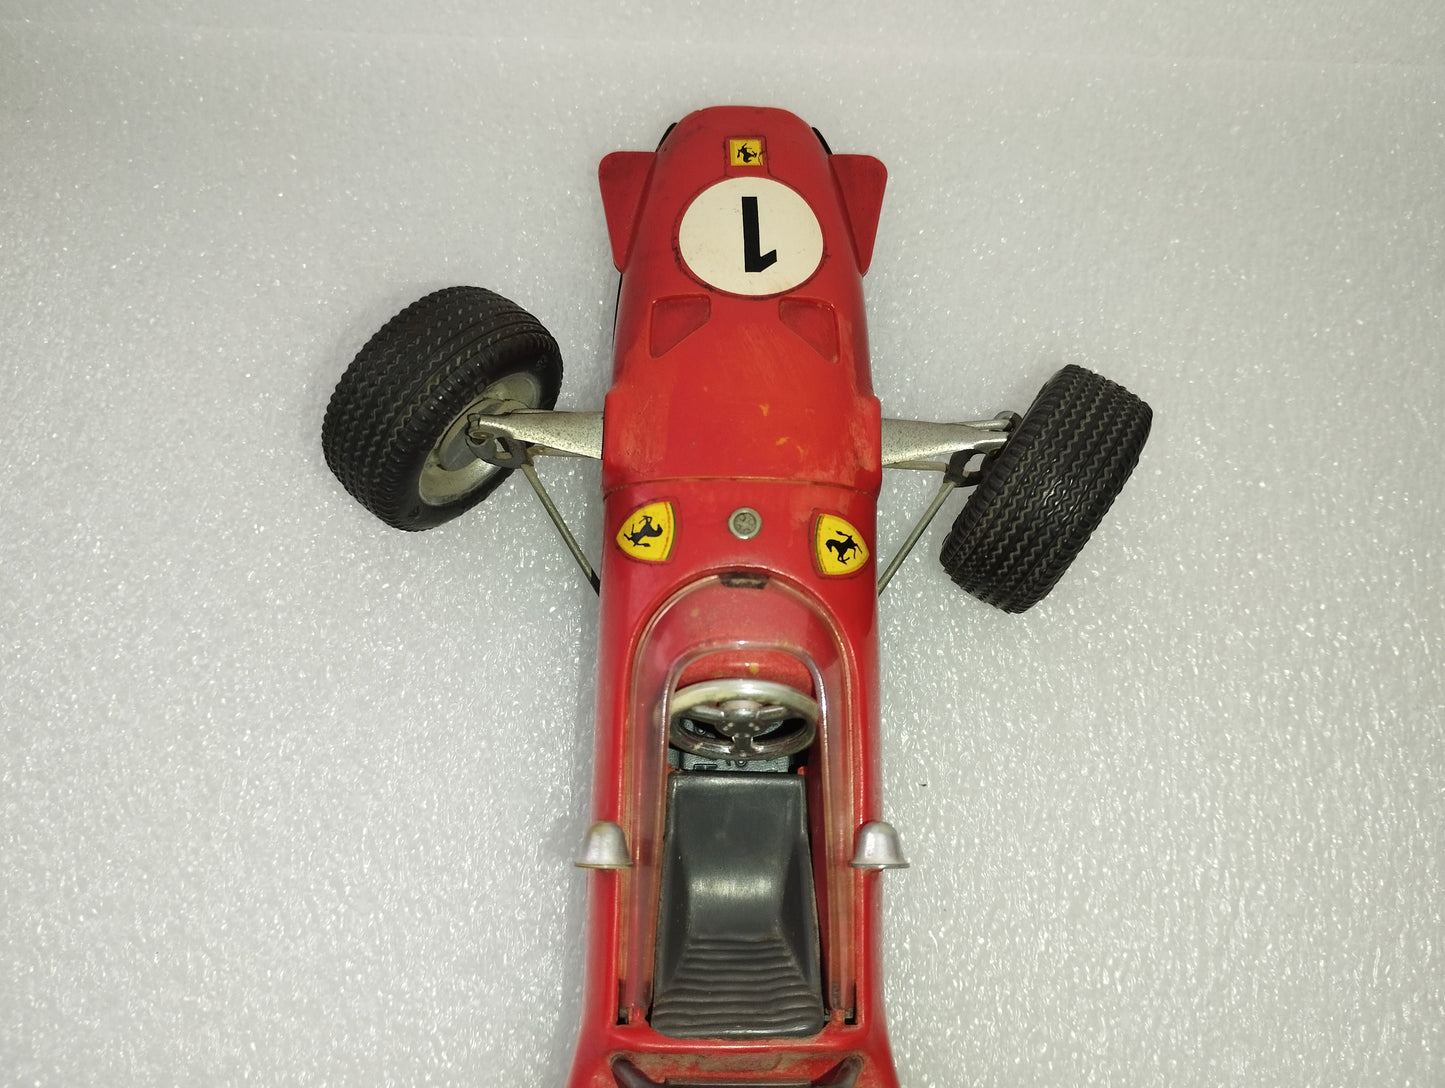 Ferrari 320 PS Formel 2 model

 Produced in 1965 by Schuco Code .1073

 Scale 1:18